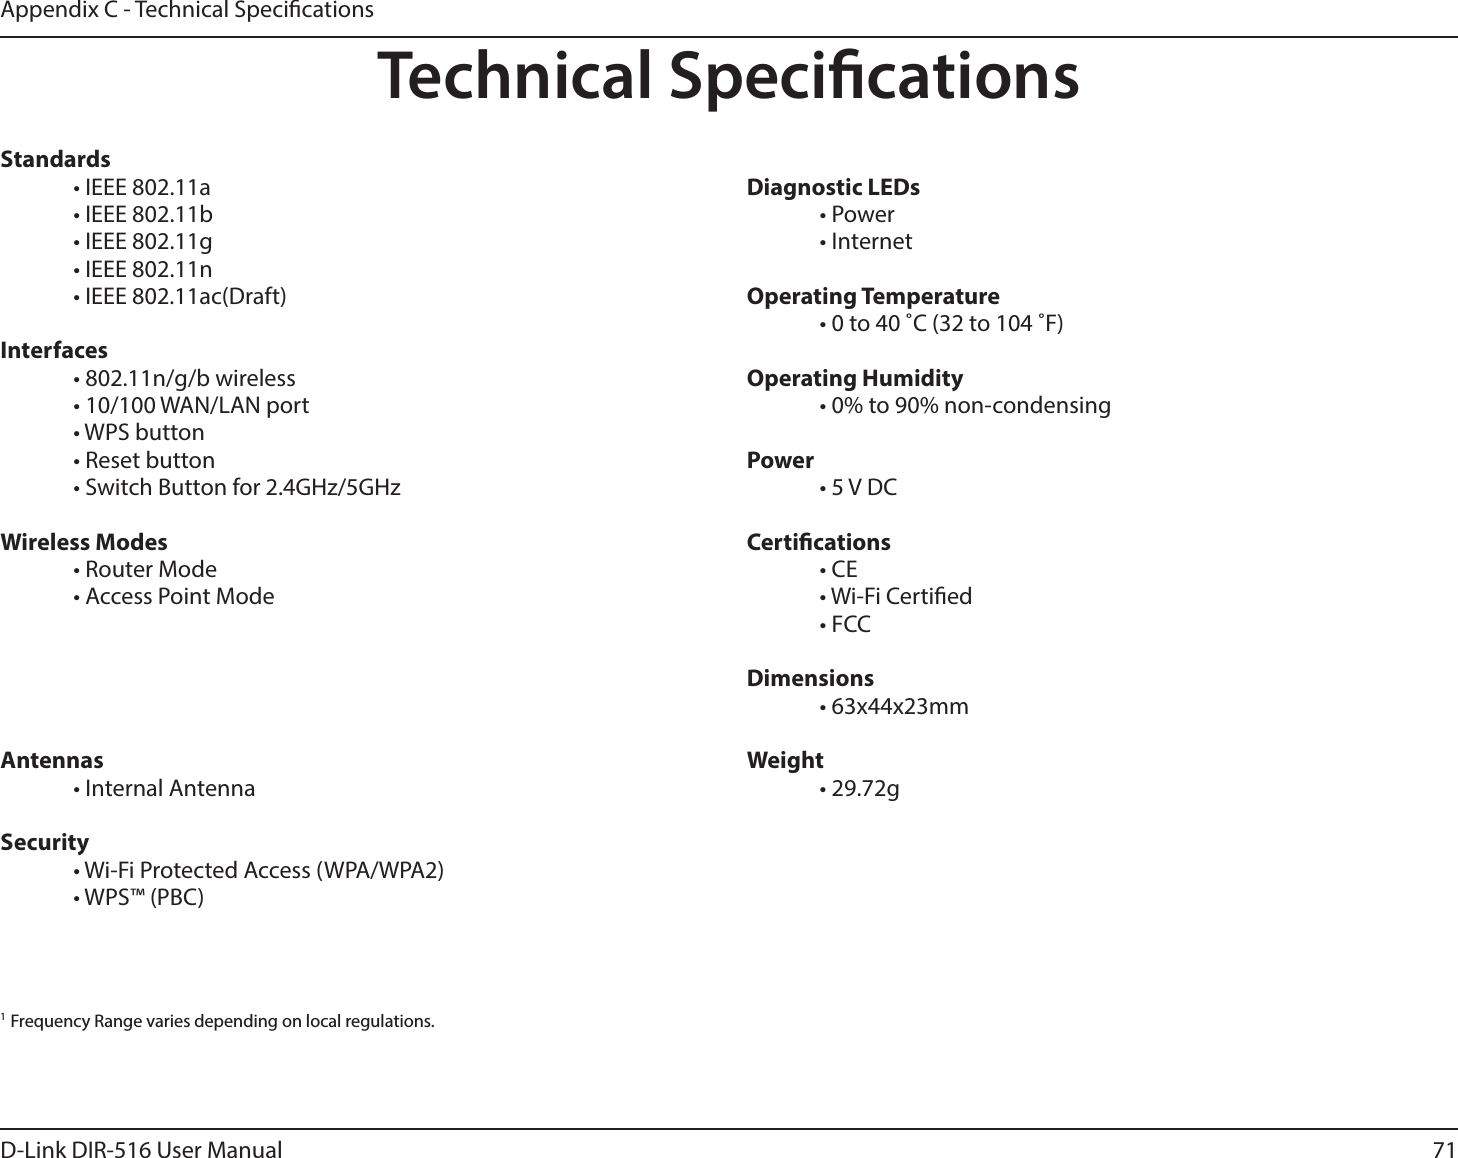 71D-Link DIR-516 User ManualAppendix C - Technical SpecicationsTechnical SpecicationsStandards  • IEEE 802.11a  • IEEE 802.11b  • IEEE 802.11g  • IEEE 802.11n  • IEEE 802.11ac(Draft)Interfaces  • 802.11n/g/b wireless  • 10/100 WAN/LAN port • WPS button  • Reset button  • Switch Button for 2.4GHz/5GHzWireless Modes  • Router Mode  • Access Point ModeWireless Frequency Range1  • 2.4 GHz to 2.4835 GHz  • 5.15~5.25GHz, 5.725 ~ 5.85GHzAntennas • Internal AntennaSecurity  • Wi-Fi Protected Access (WPA/WPA2) • WPS™ (PBC) Diagnostic LEDs • Power • InternetOperating Temperature  • 0 to 40 ˚C (32 to 104 ˚F)Operating Humidity  • 0% to 90% non-condensingPower  • 5 V DC Certications • CE • Wi-Fi Certied • FCCDimensions • 63x44x23mmWeight • 29.72g1 Frequency Range varies depending on local regulations.